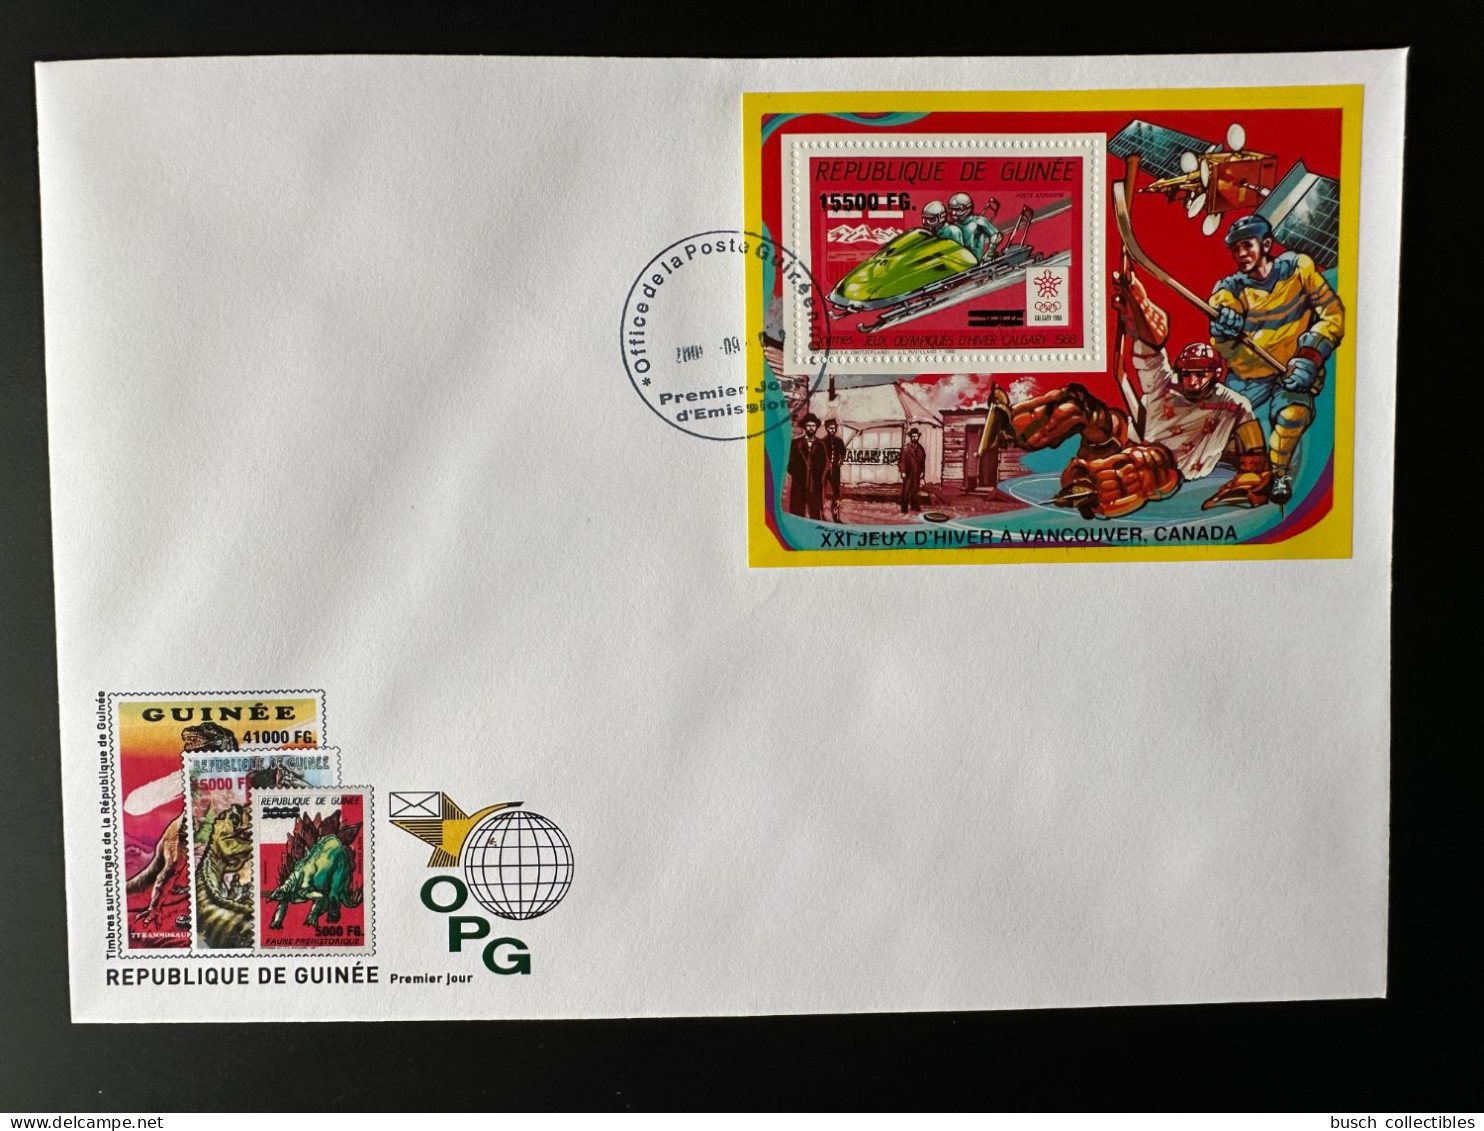 Guinée Guinea 2009 FDC Mi. Bl. 1727 Surch Overprint Winter Olympic Calgary 1988 Vancouver 2010 Jeux Olympiques Bobsleigh - Winter 2010: Vancouver